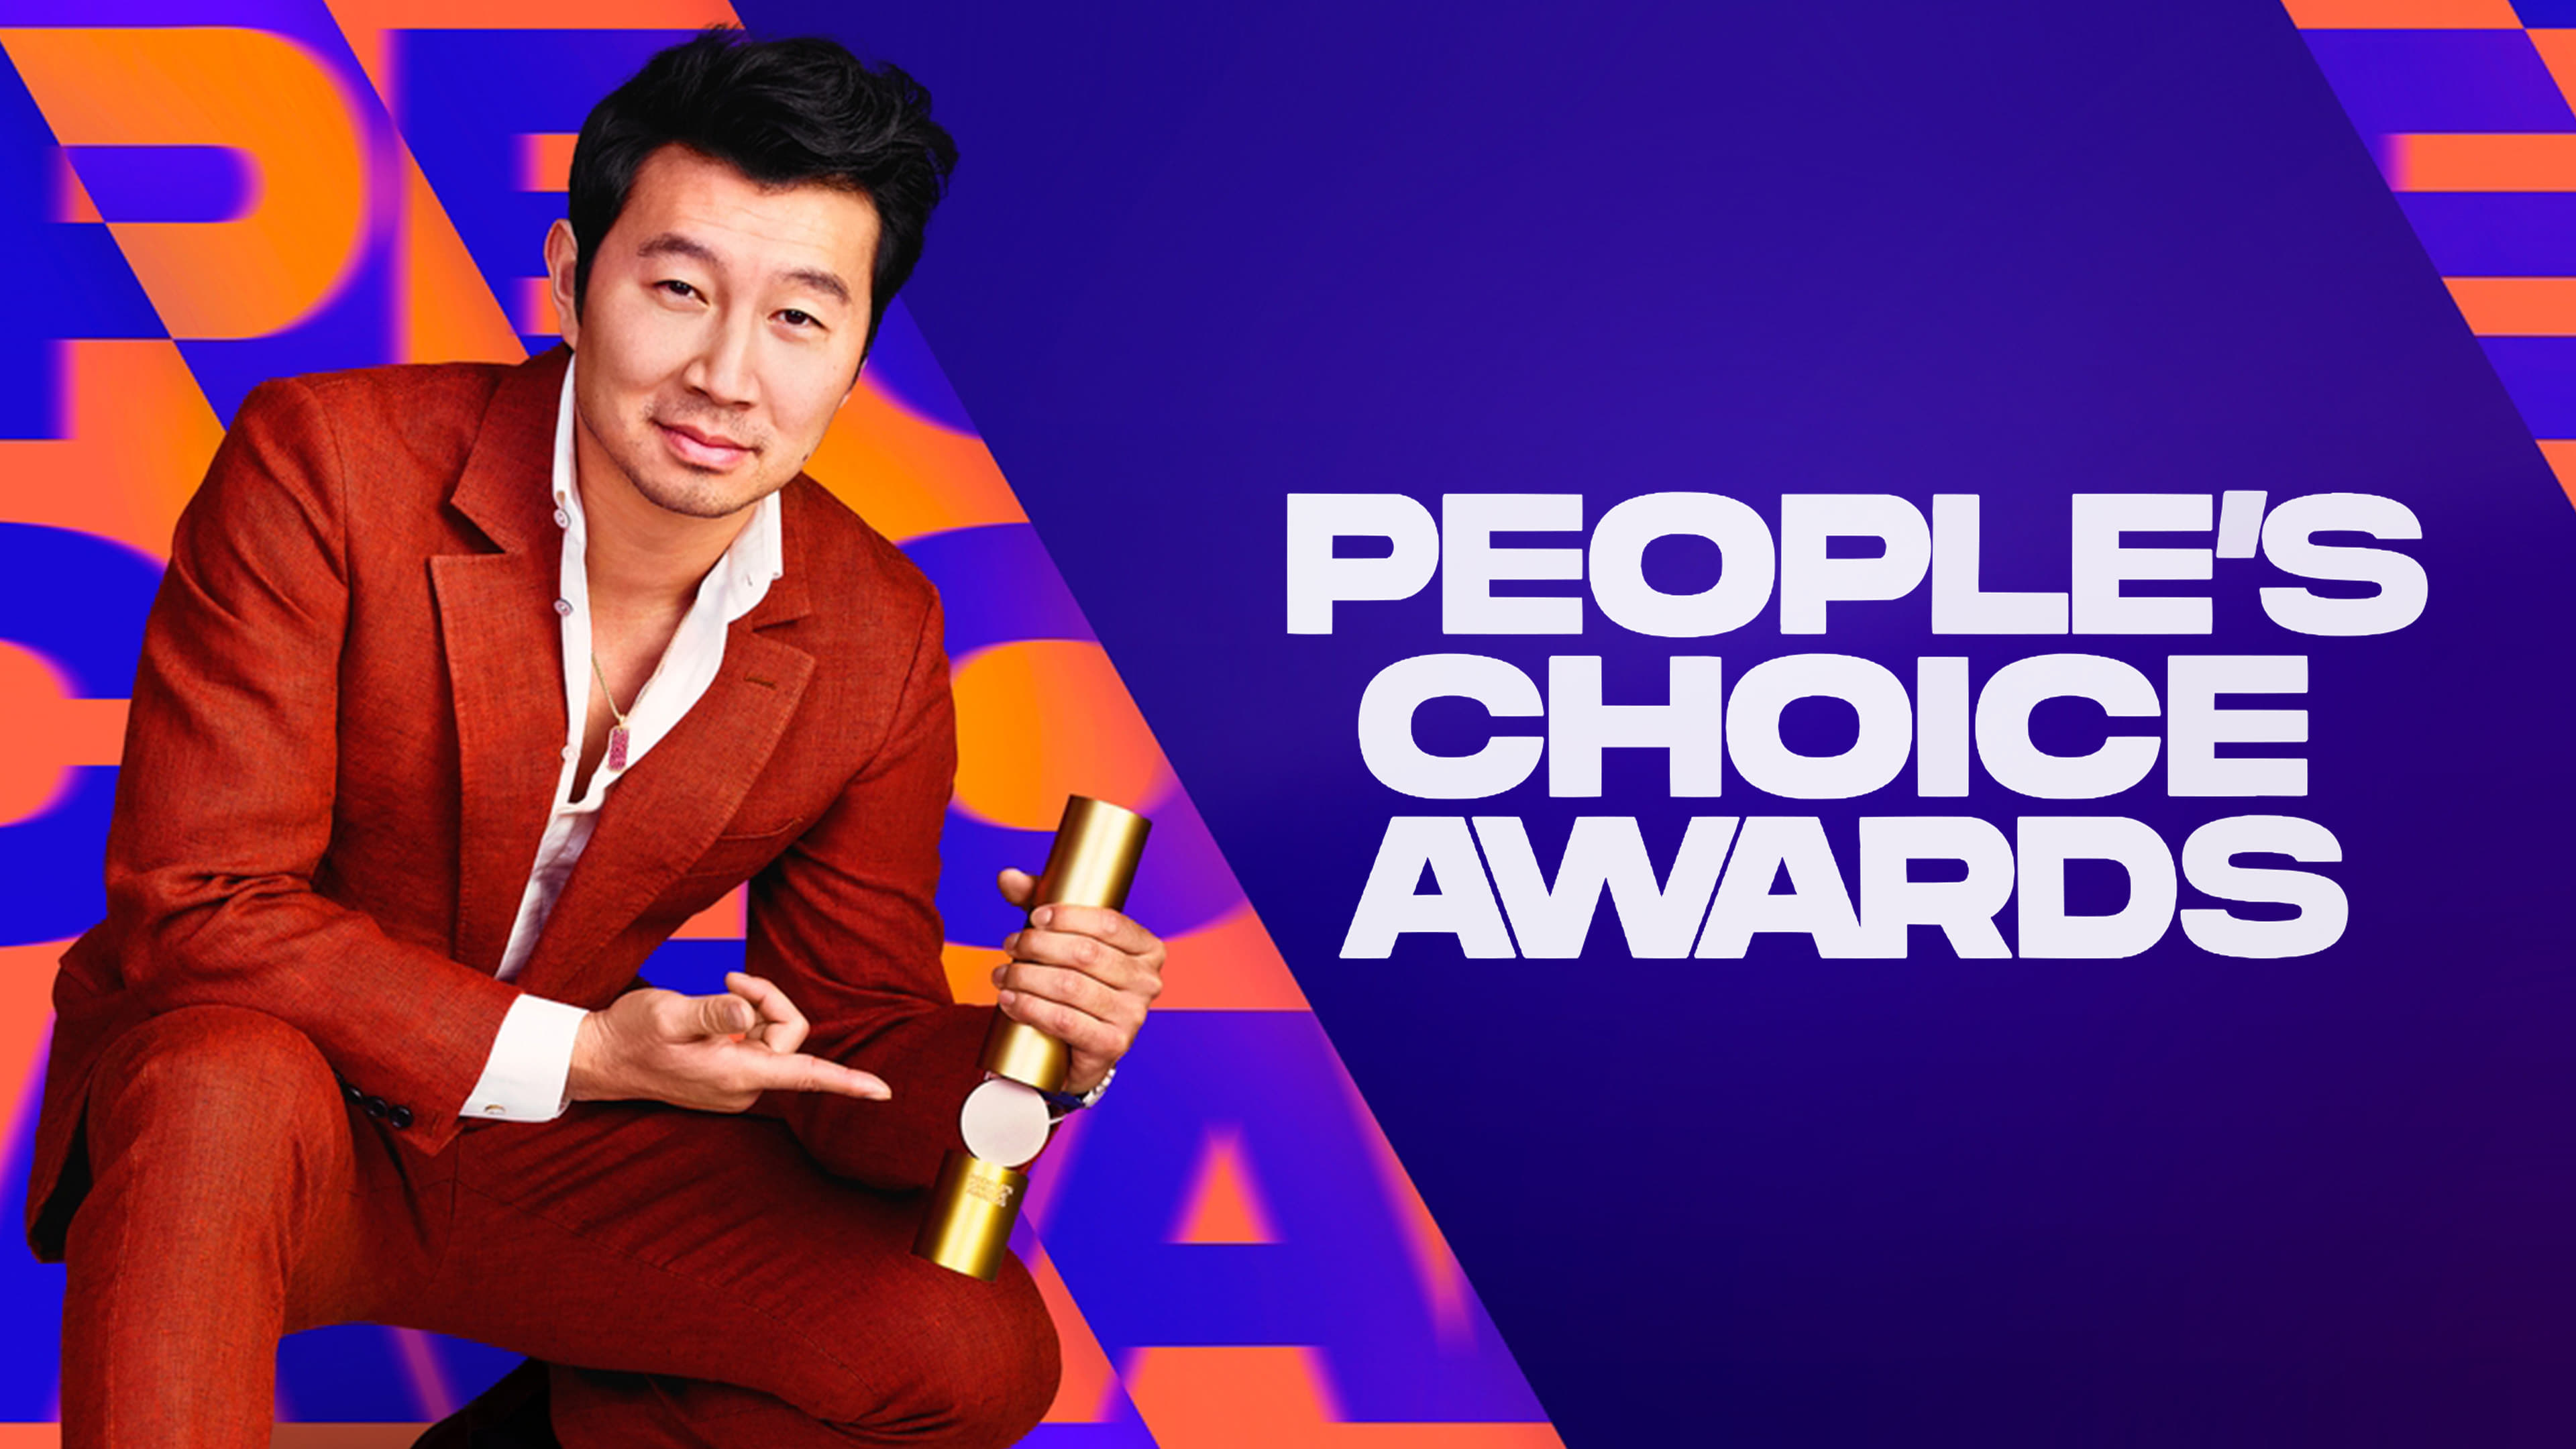 The 34th Annual People's Choice Awards